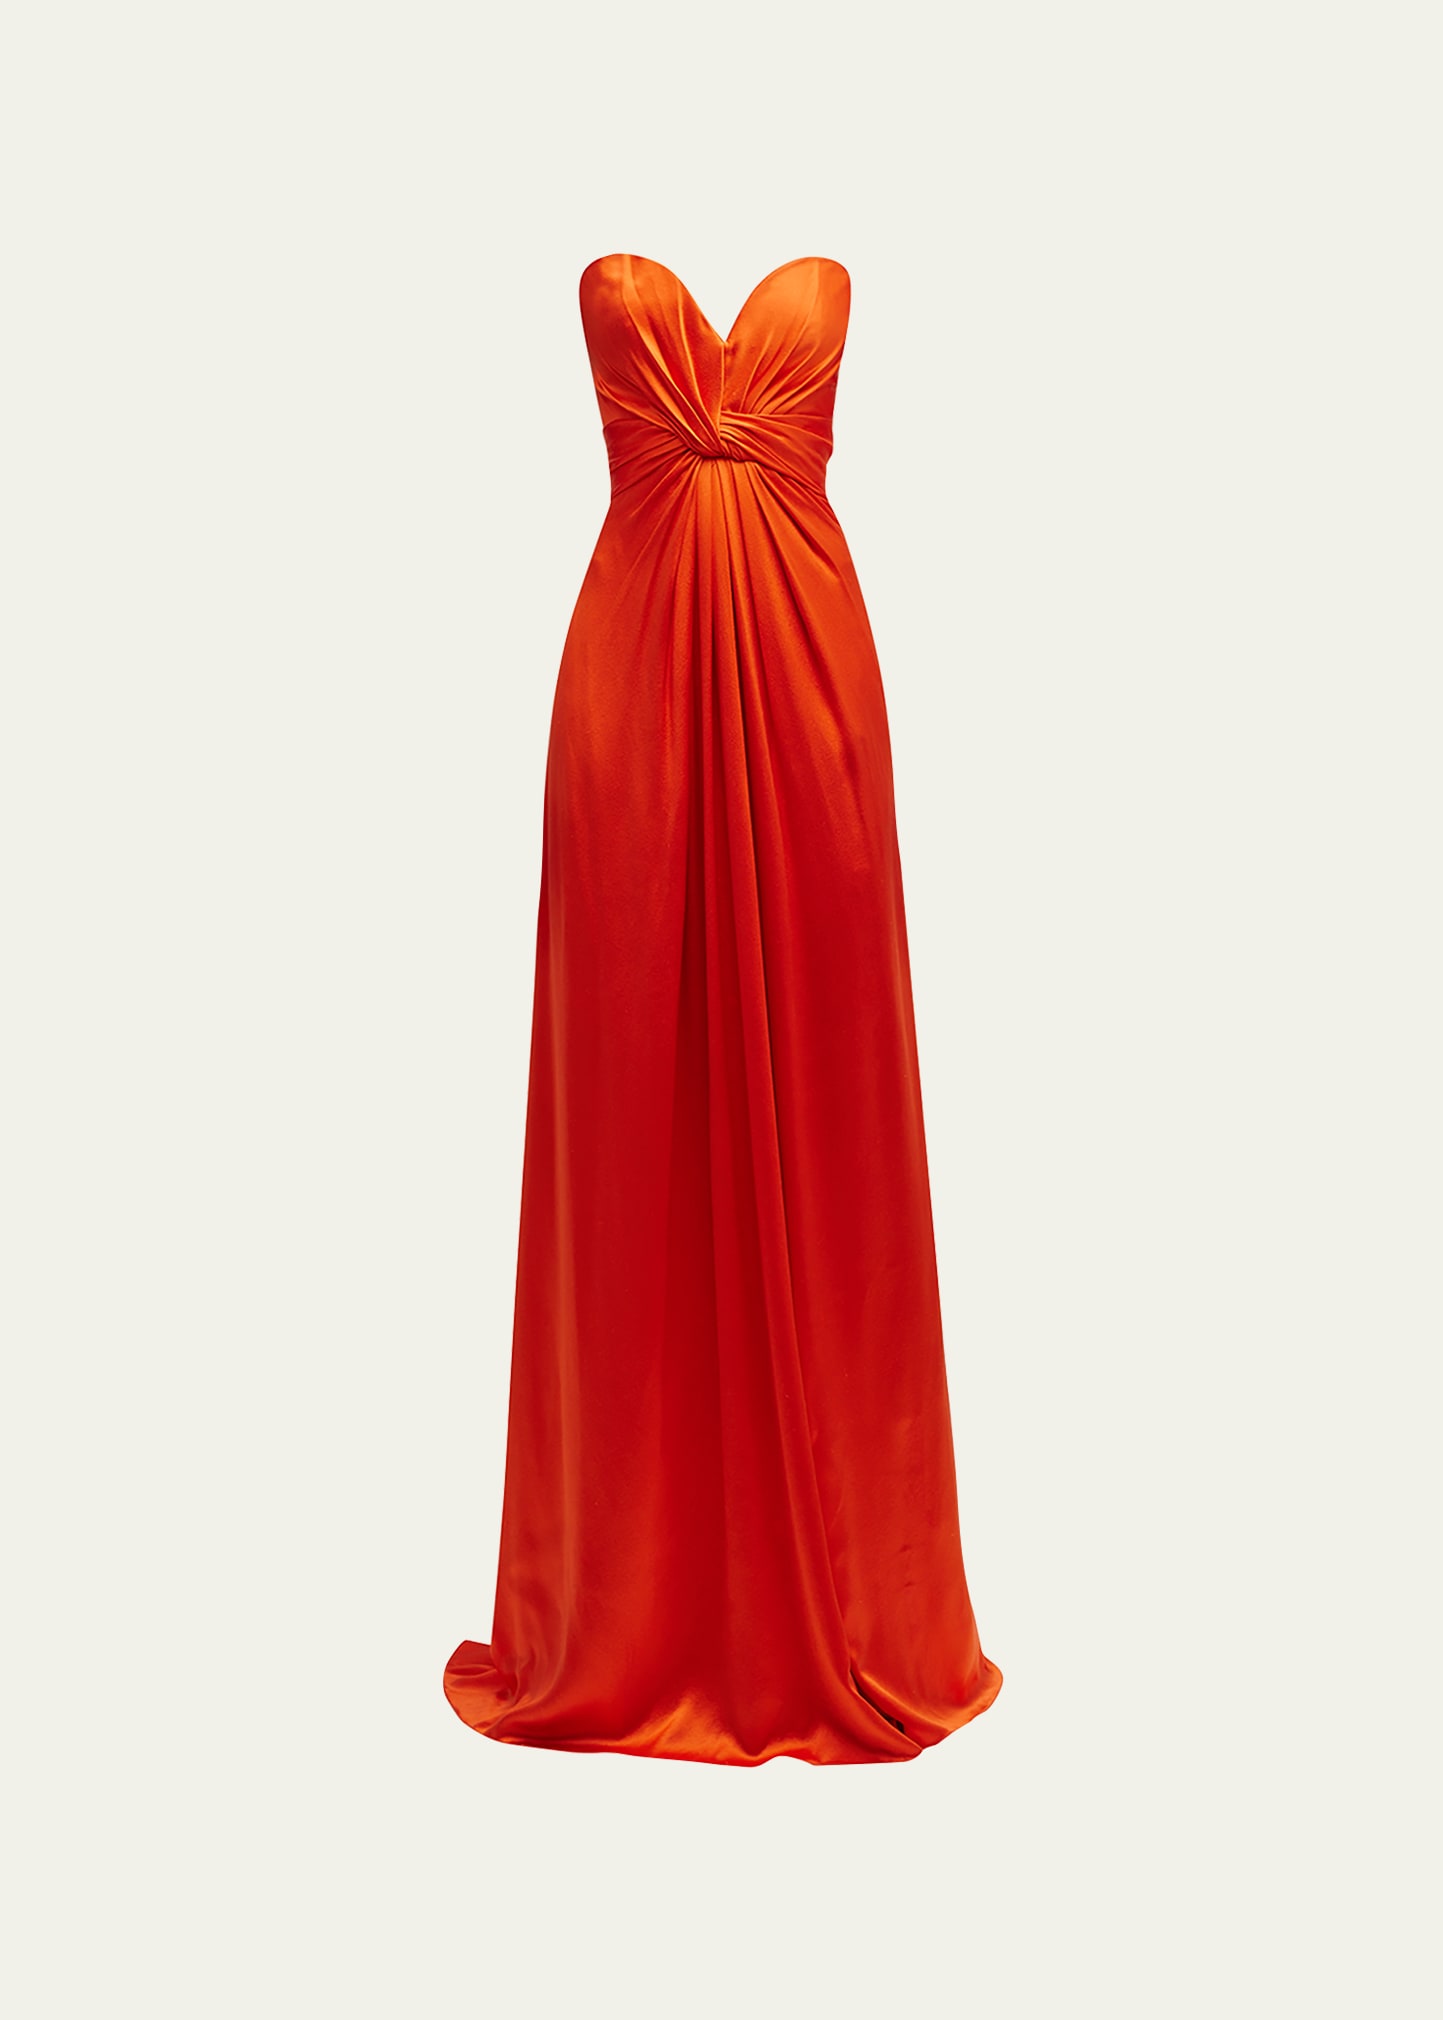 Monique Lhuillier Strapless Gown With Twist-draped Bodice In Poppy